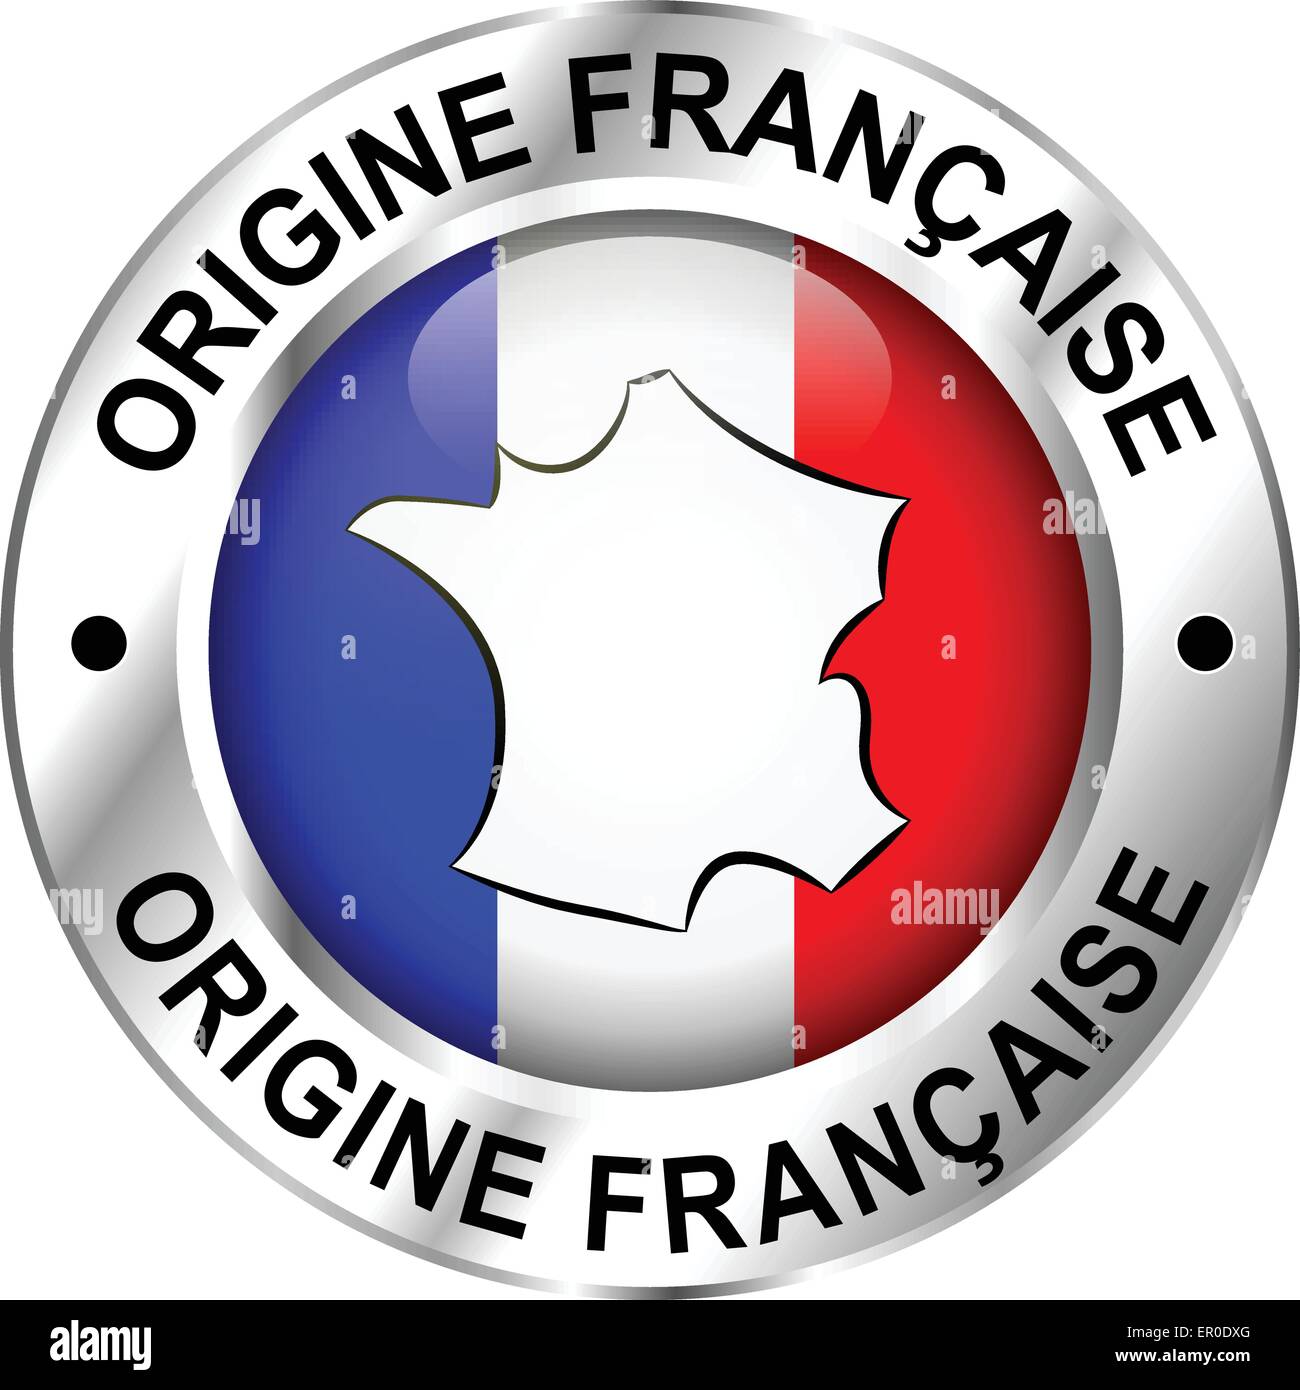 French translation of french origin round design icon Stock Vector